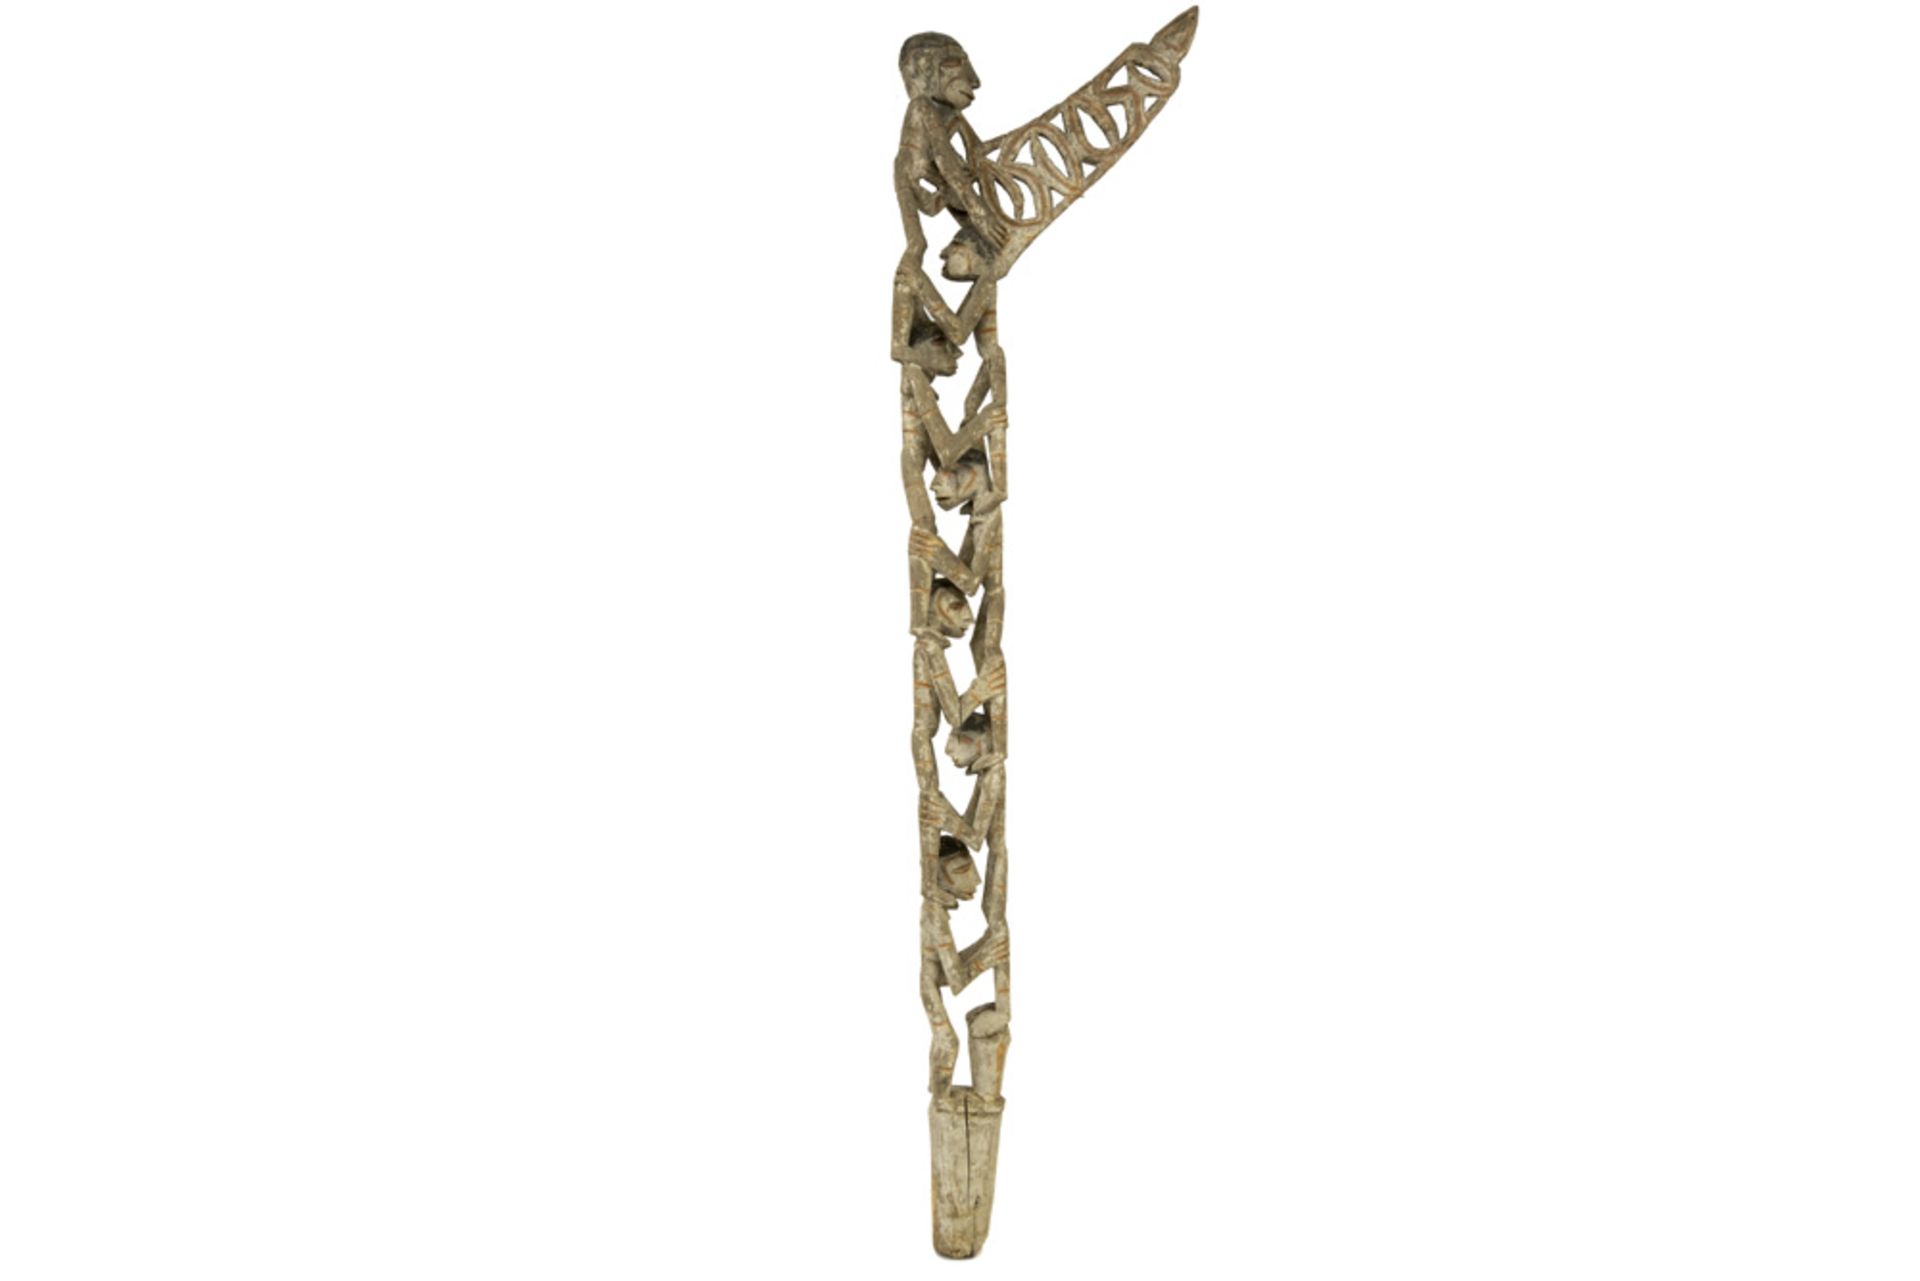 Irian Jaya Central Asmat Mbis pole from the village Atsj carved from a mangrove tree and used during